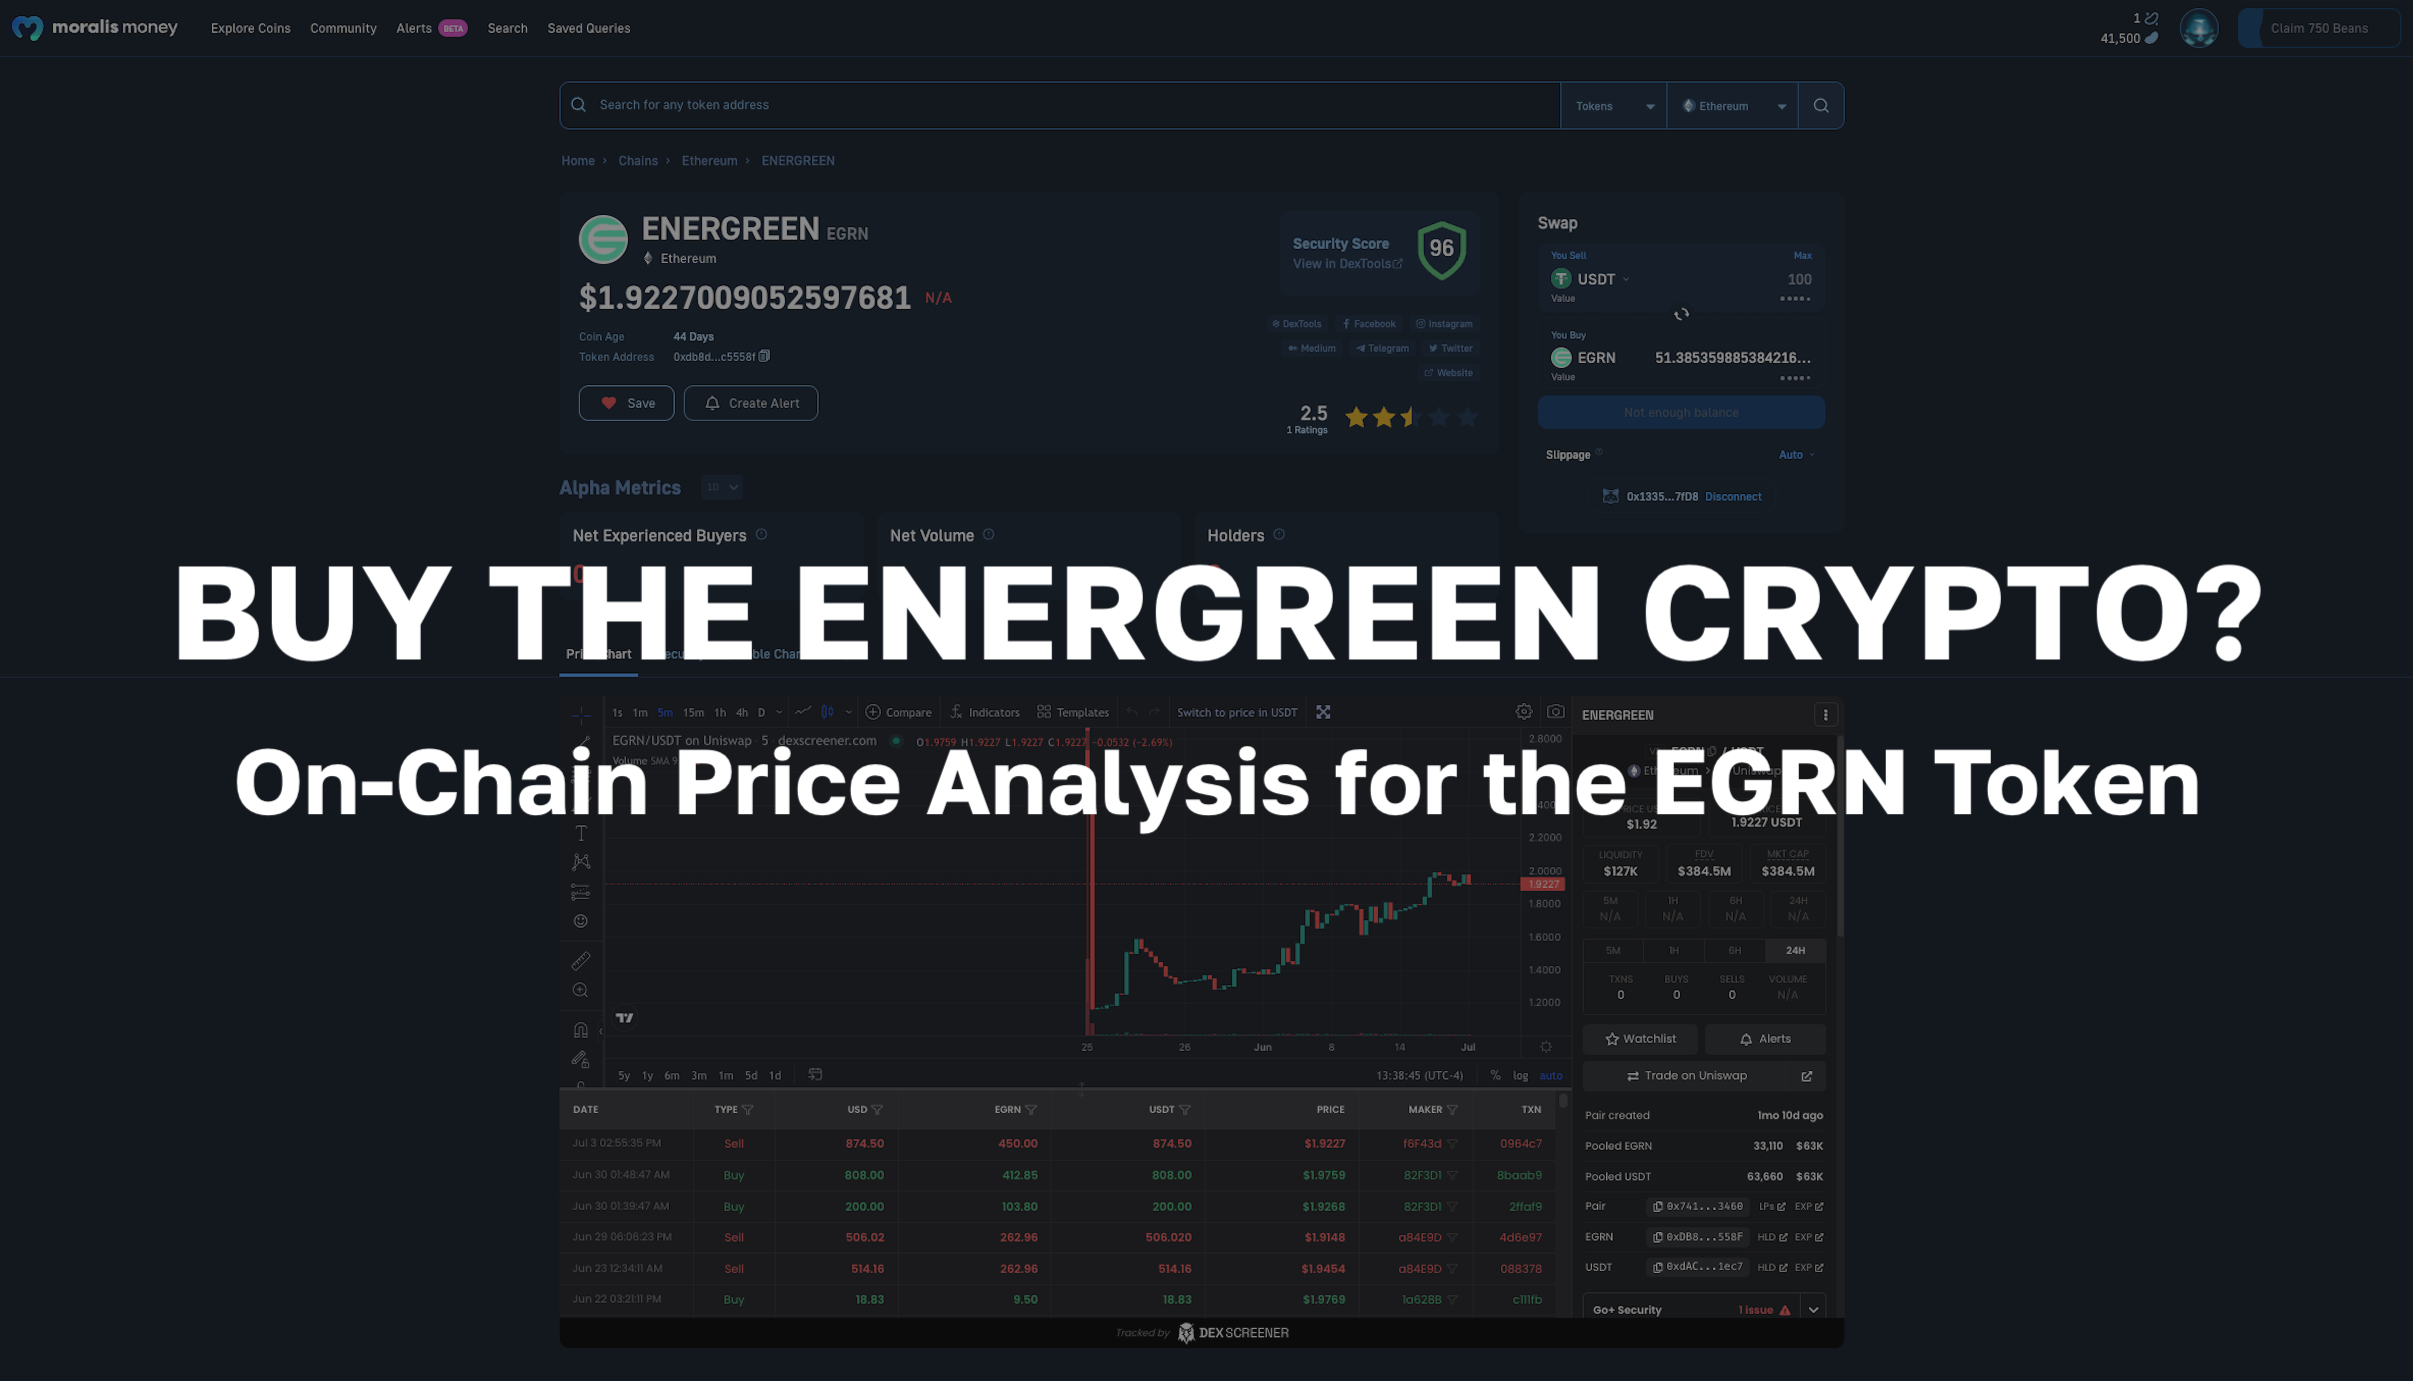 Should You Buy the Energreen Crypto? On-Chain Price Analysis for EGRN Token